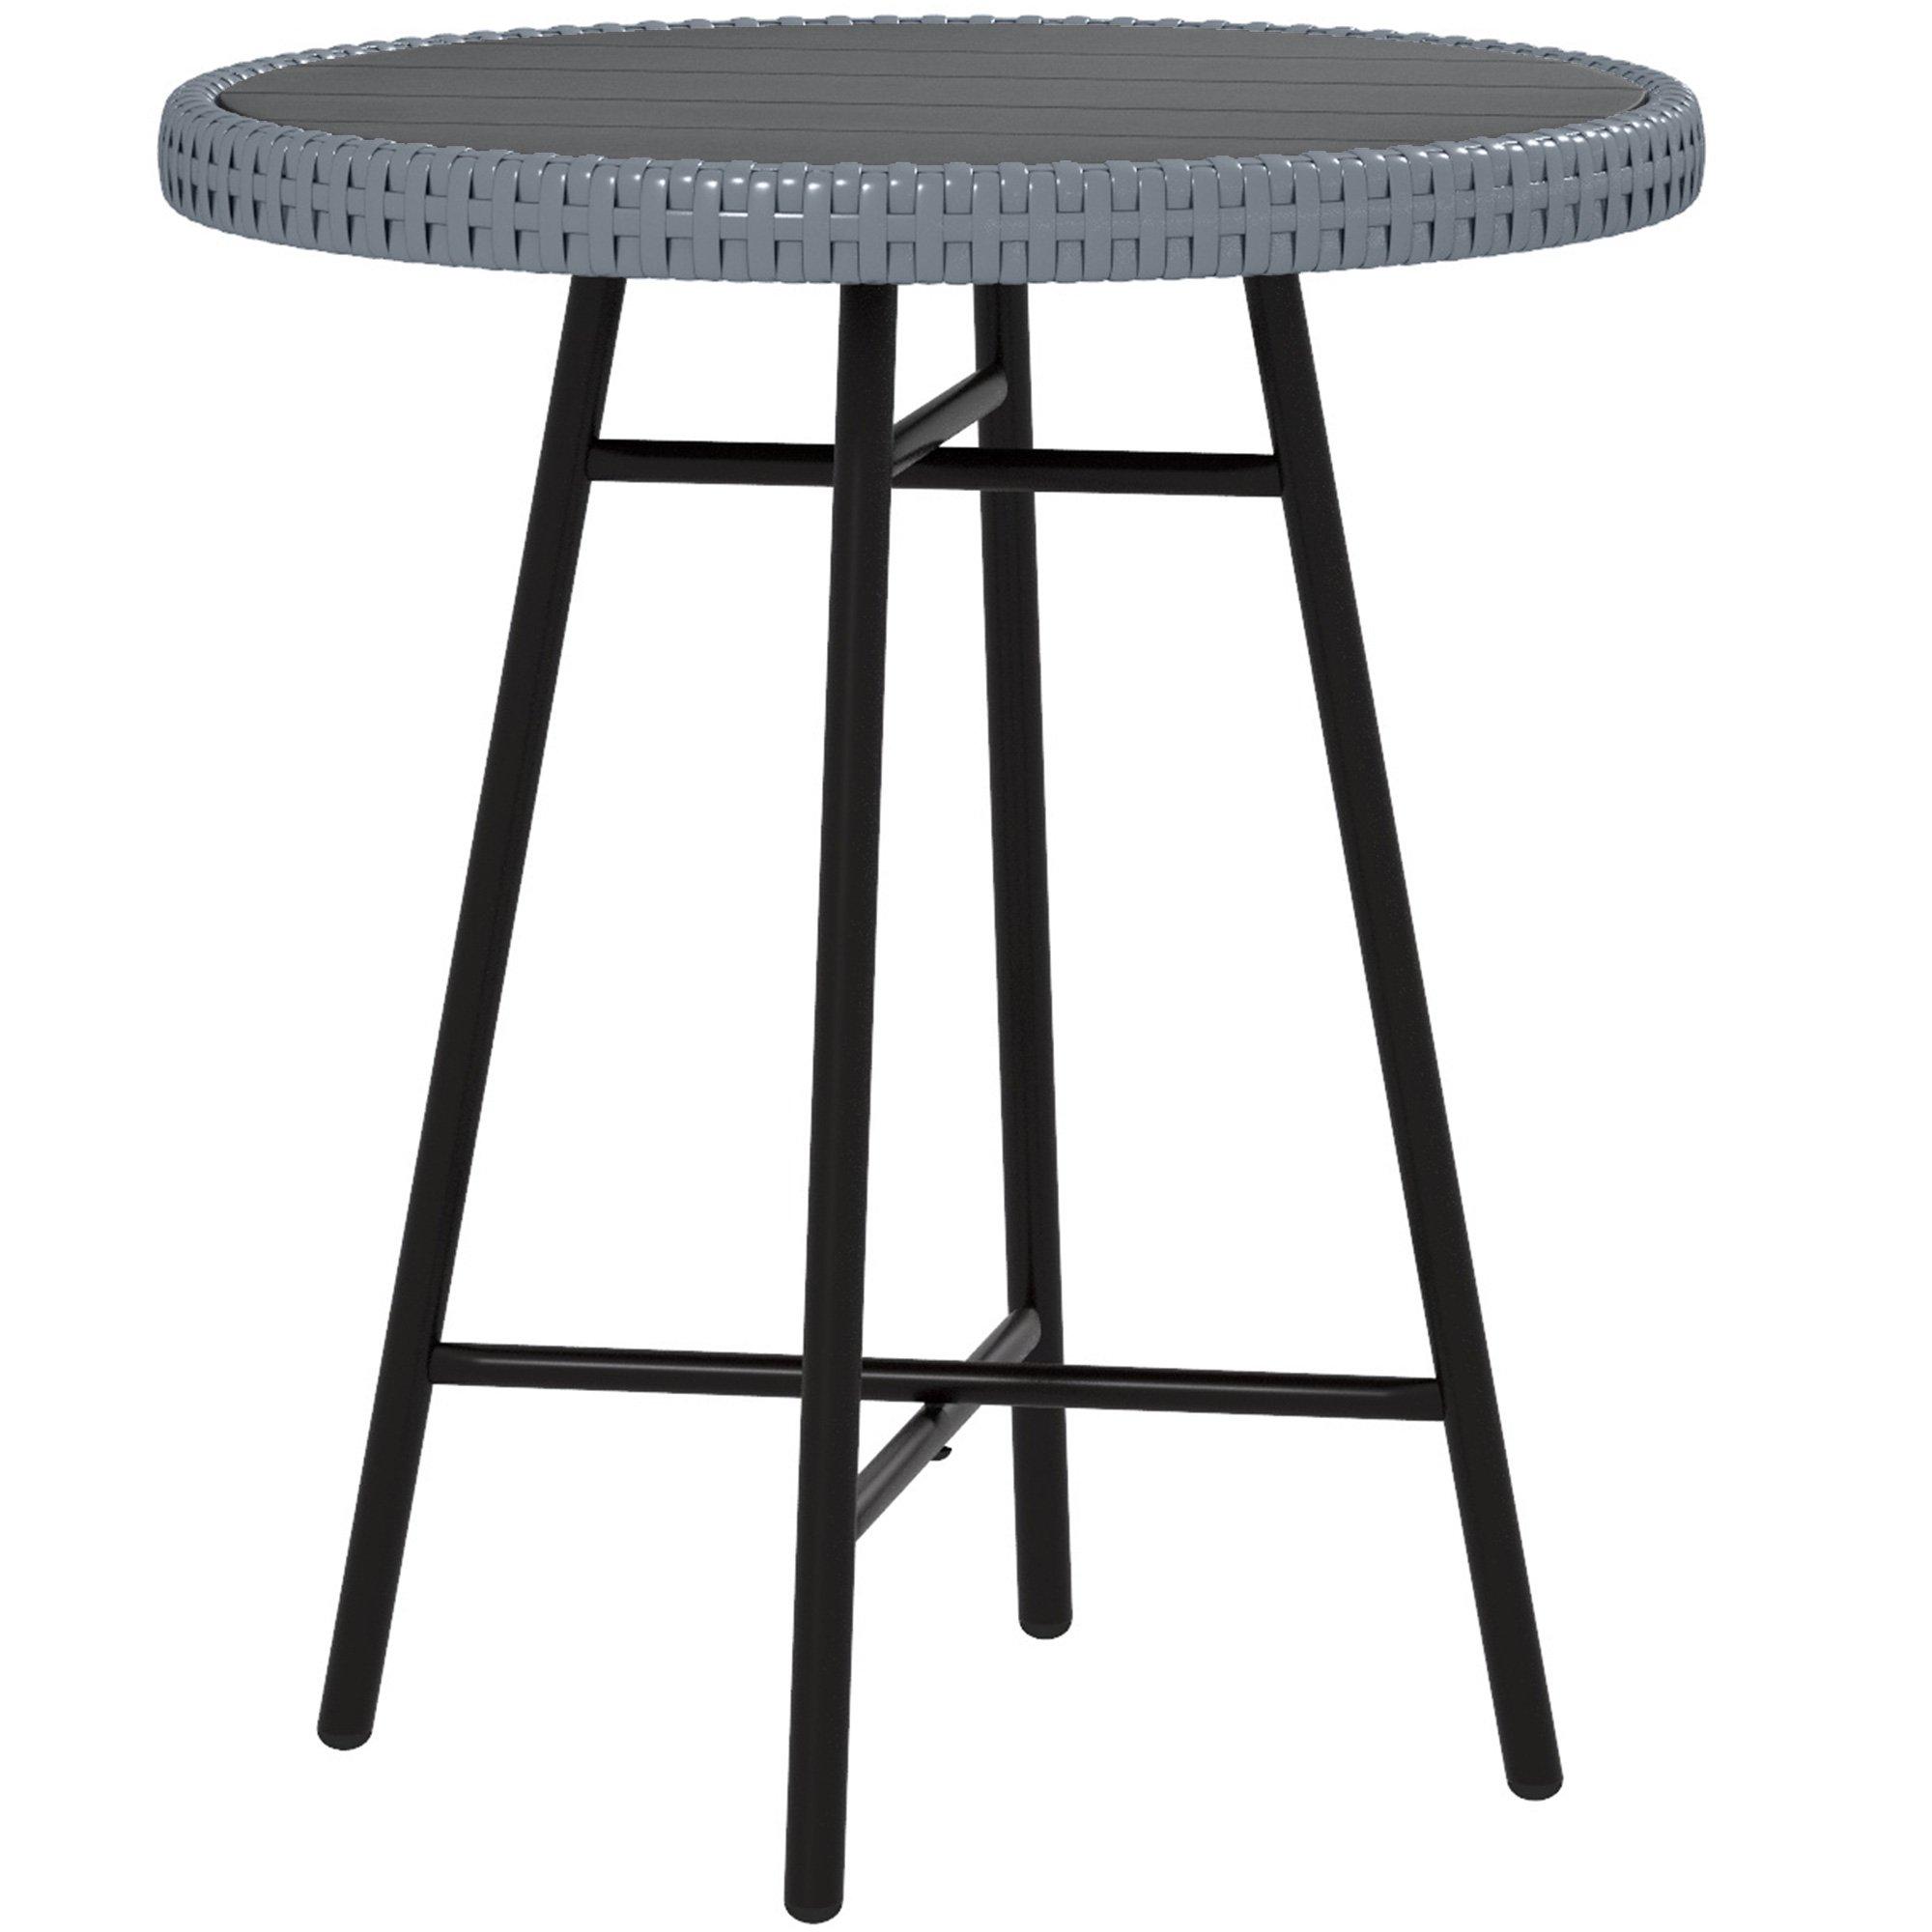 Outdoor Coffee Table with Plastic Wood Table Top, X-Shape Support